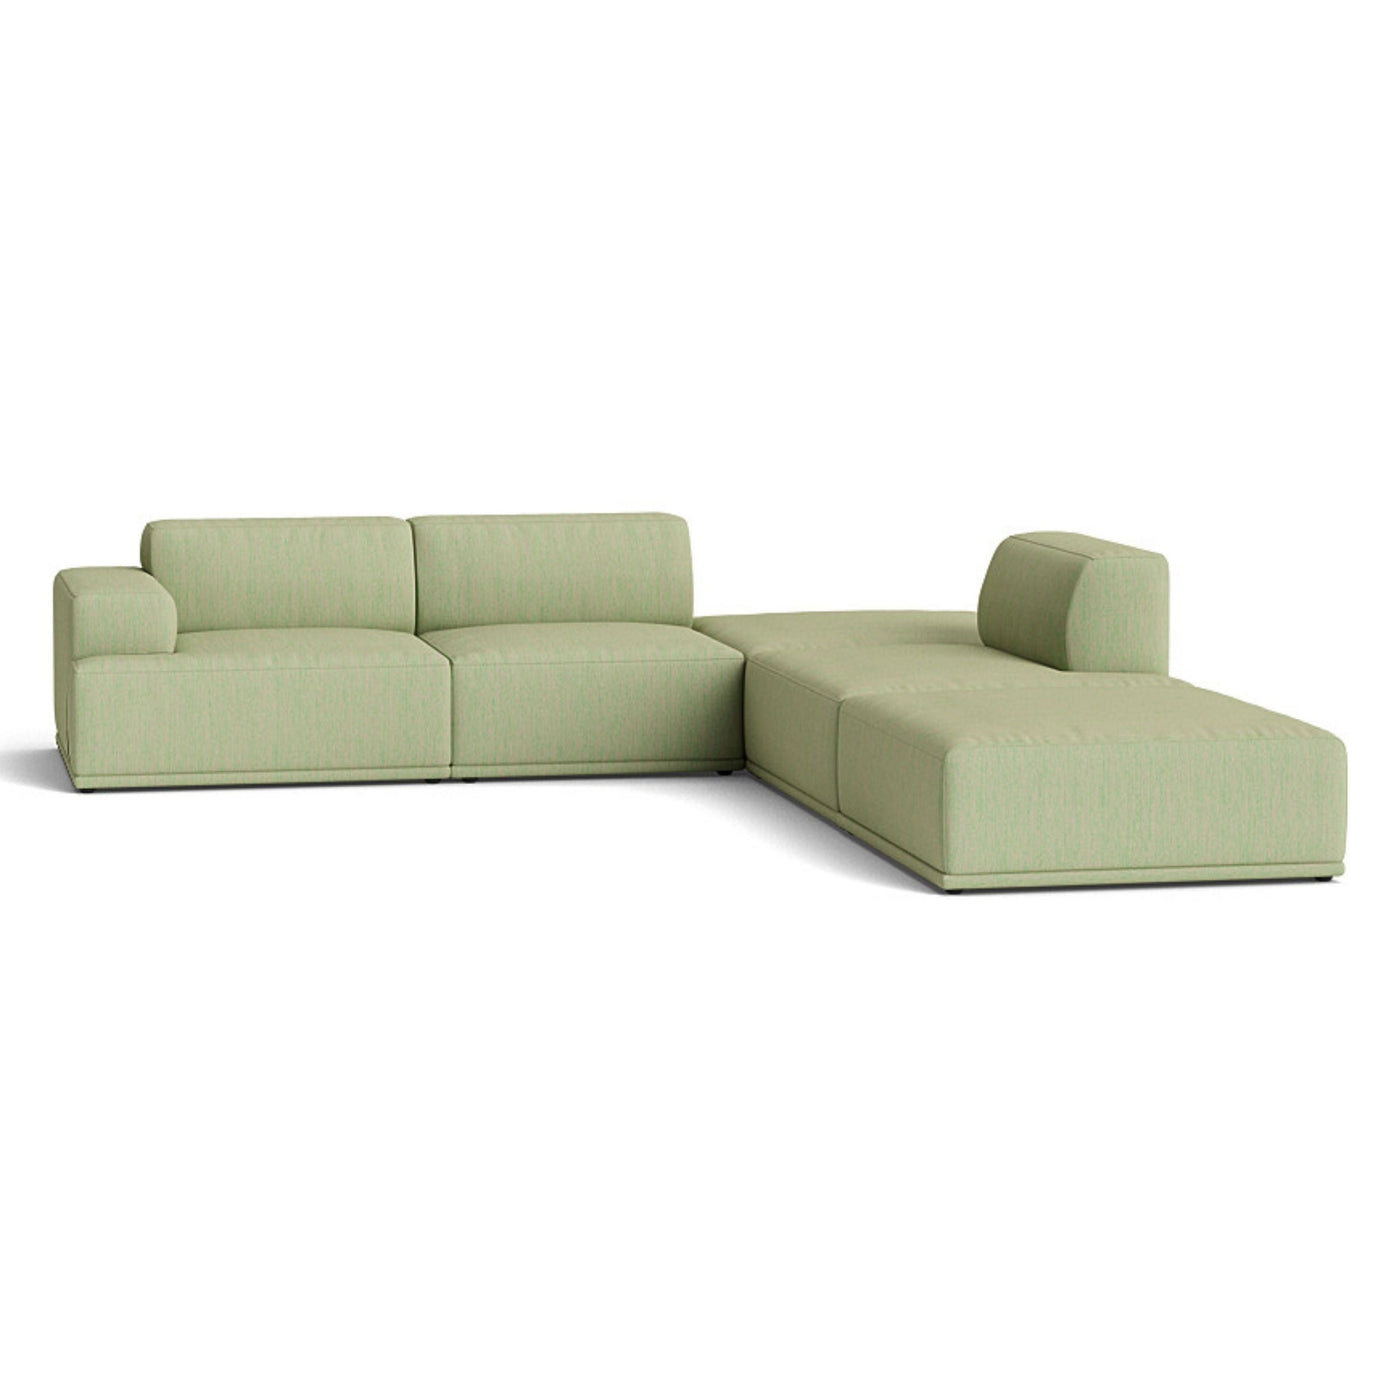 Muuto Connect Soft Modular Corner Sofa, configuration 3.  Made-to-order from someday designs. #colour_balder-942